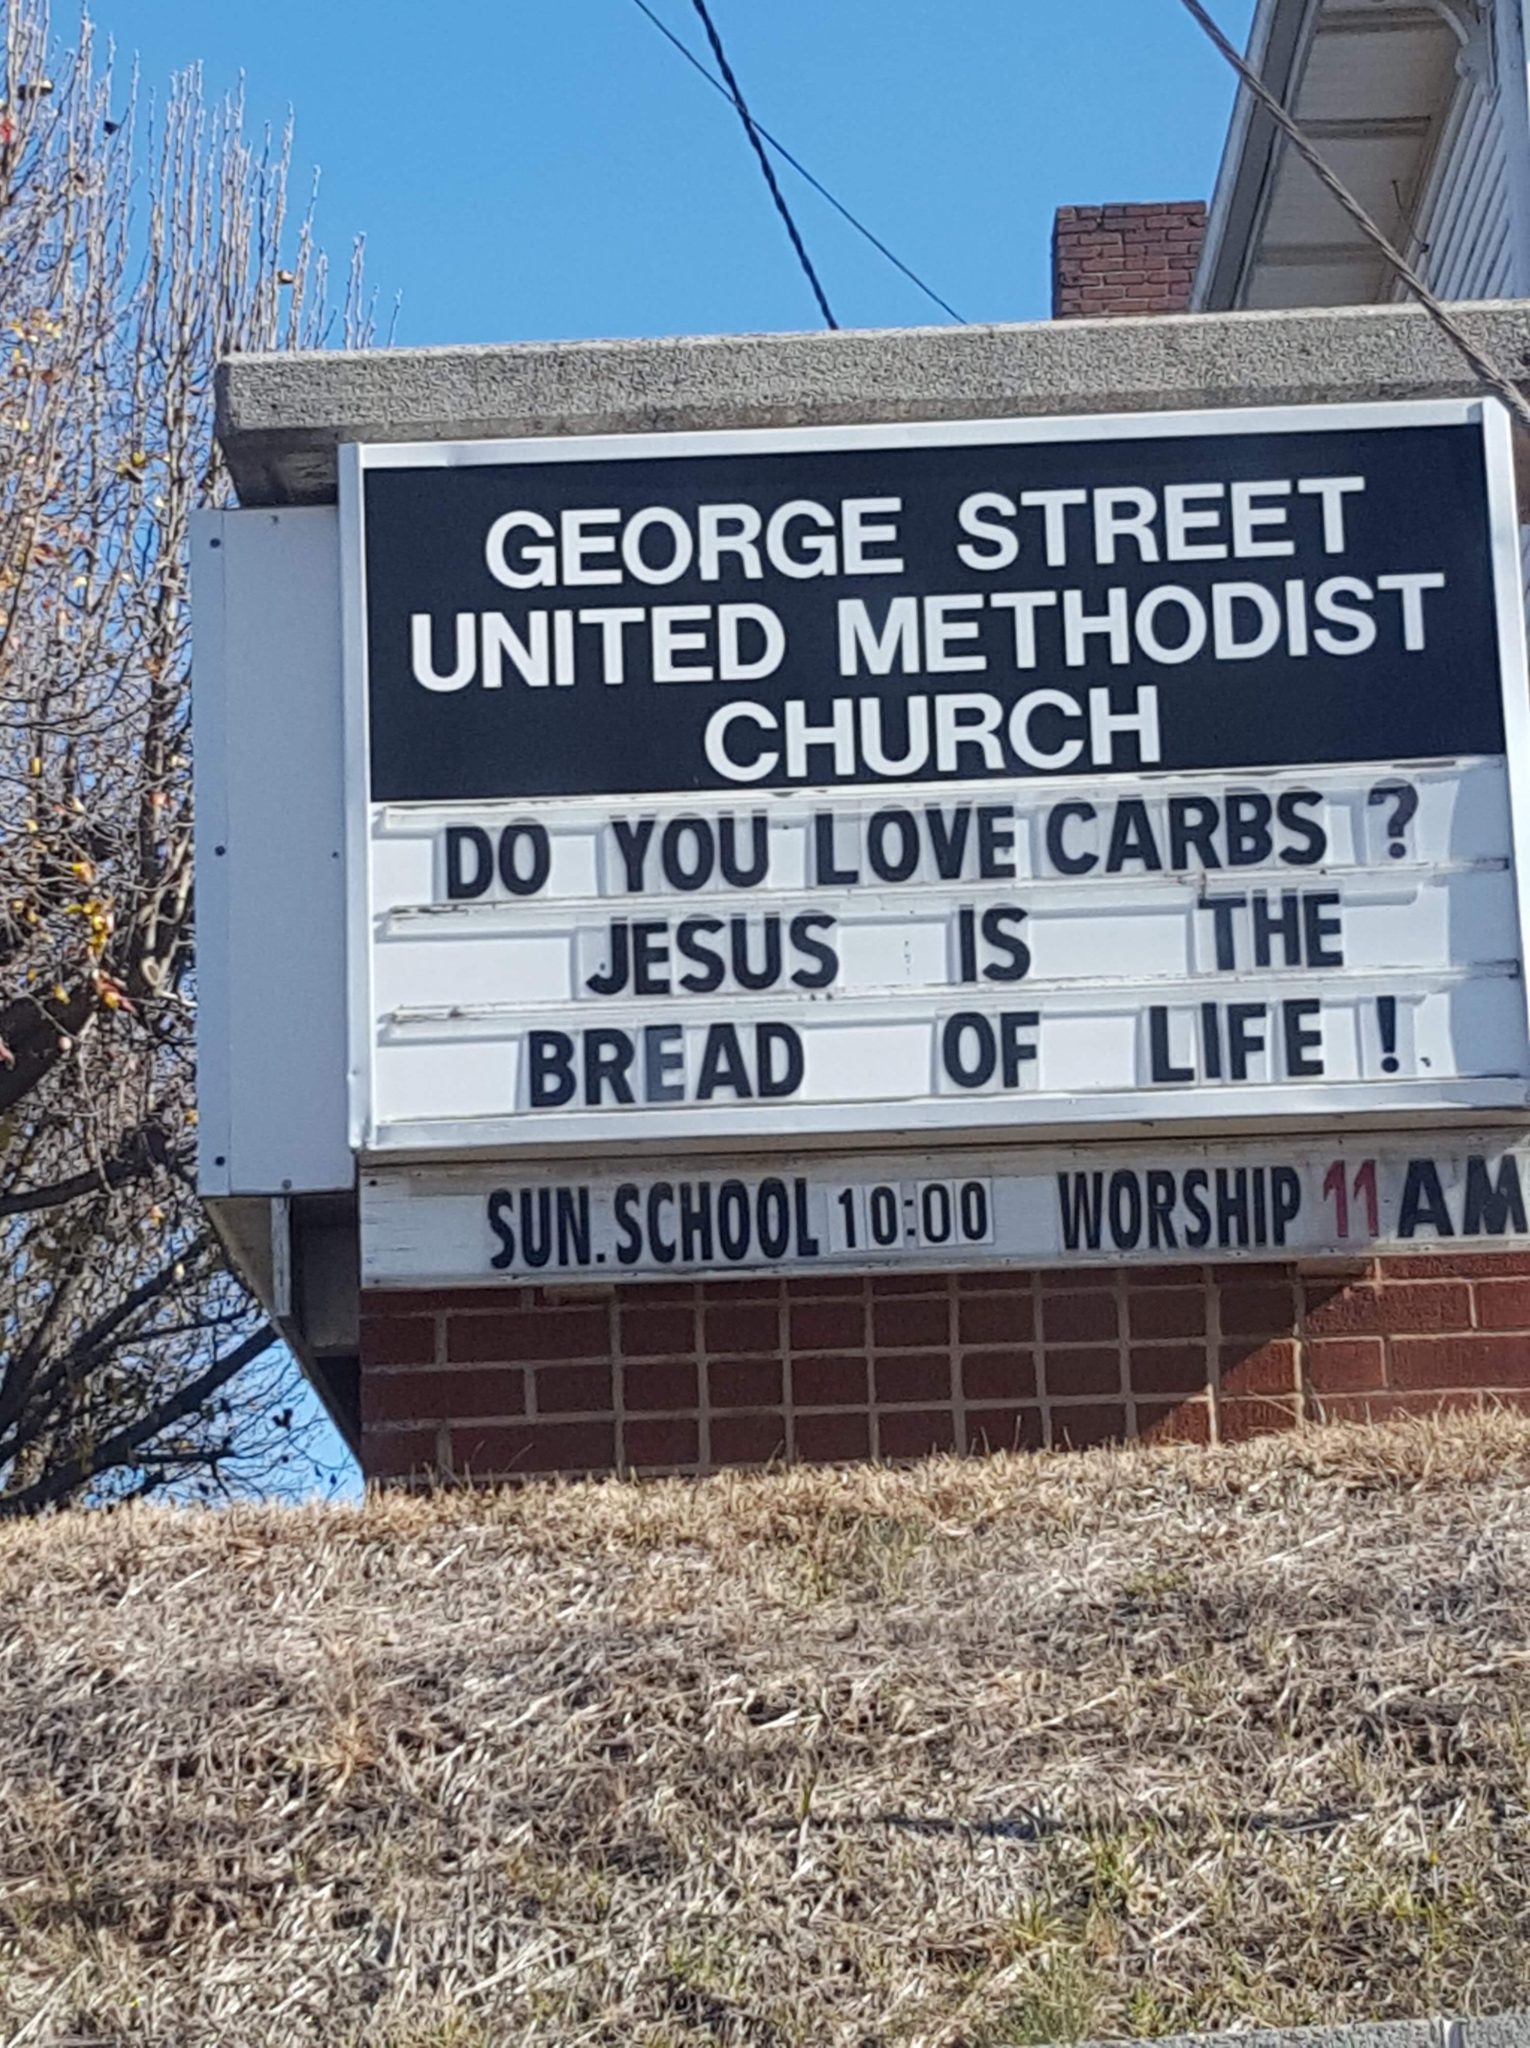 Do you love carbs church sign is this weeks church sign from George Street United Methodist Church in Jefferson City, TN Do you love carbs? Jesus is the bread of life!​ photo credit Heather Patterson 